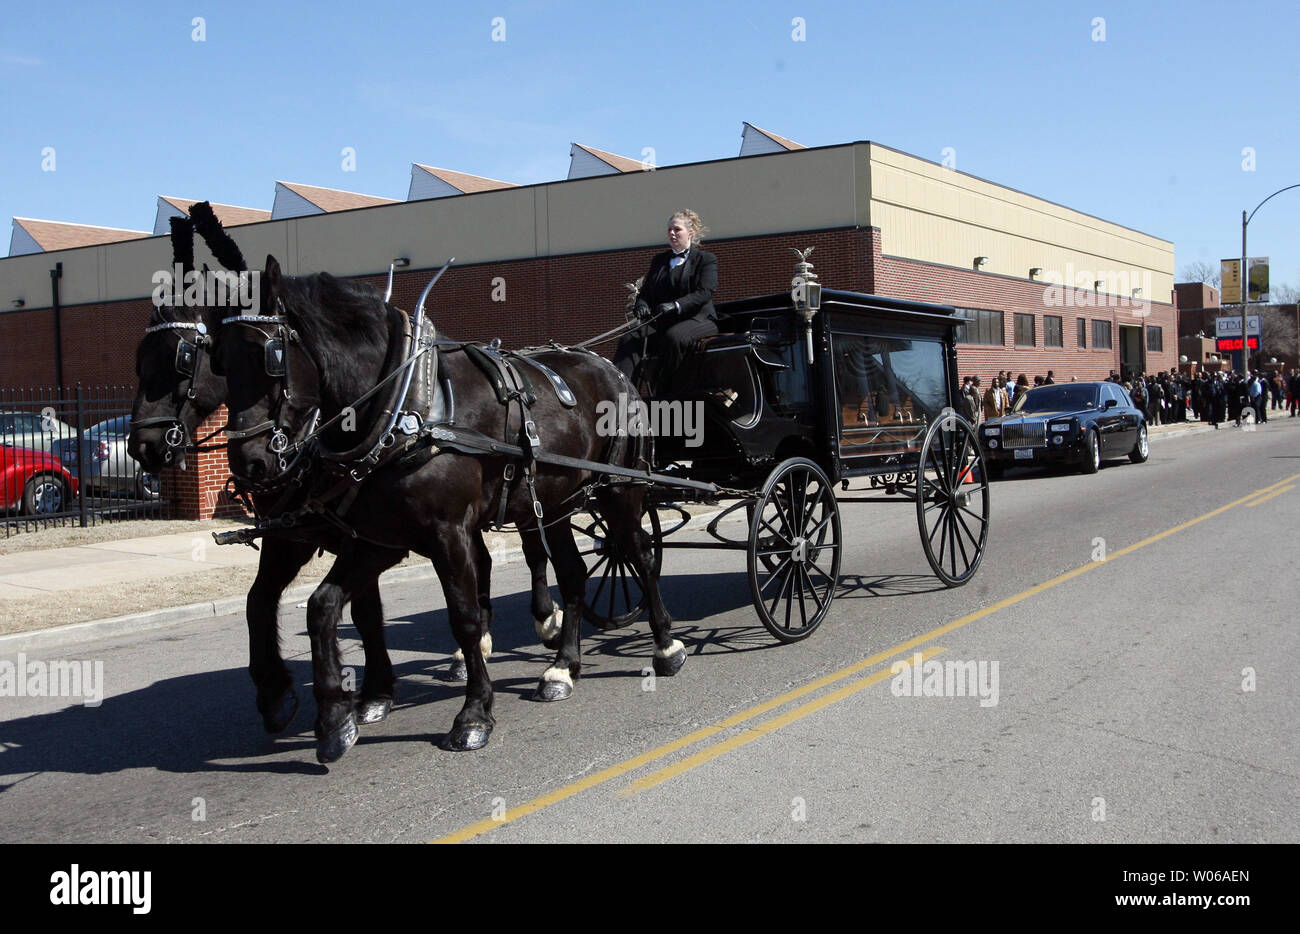 A horsedrawn carriage containing the casket of Denver Broncos running back Damien Nash, leaves the Friendly Temple Missionary Baptist Church enroute to a cemetery in St .Louis on March 5, 2007. Nash, 24, who is from St. Louis, died on February 24, after playing in a charity basketball game. (UPI Photo/Bill Greenblatt) Stock Photo